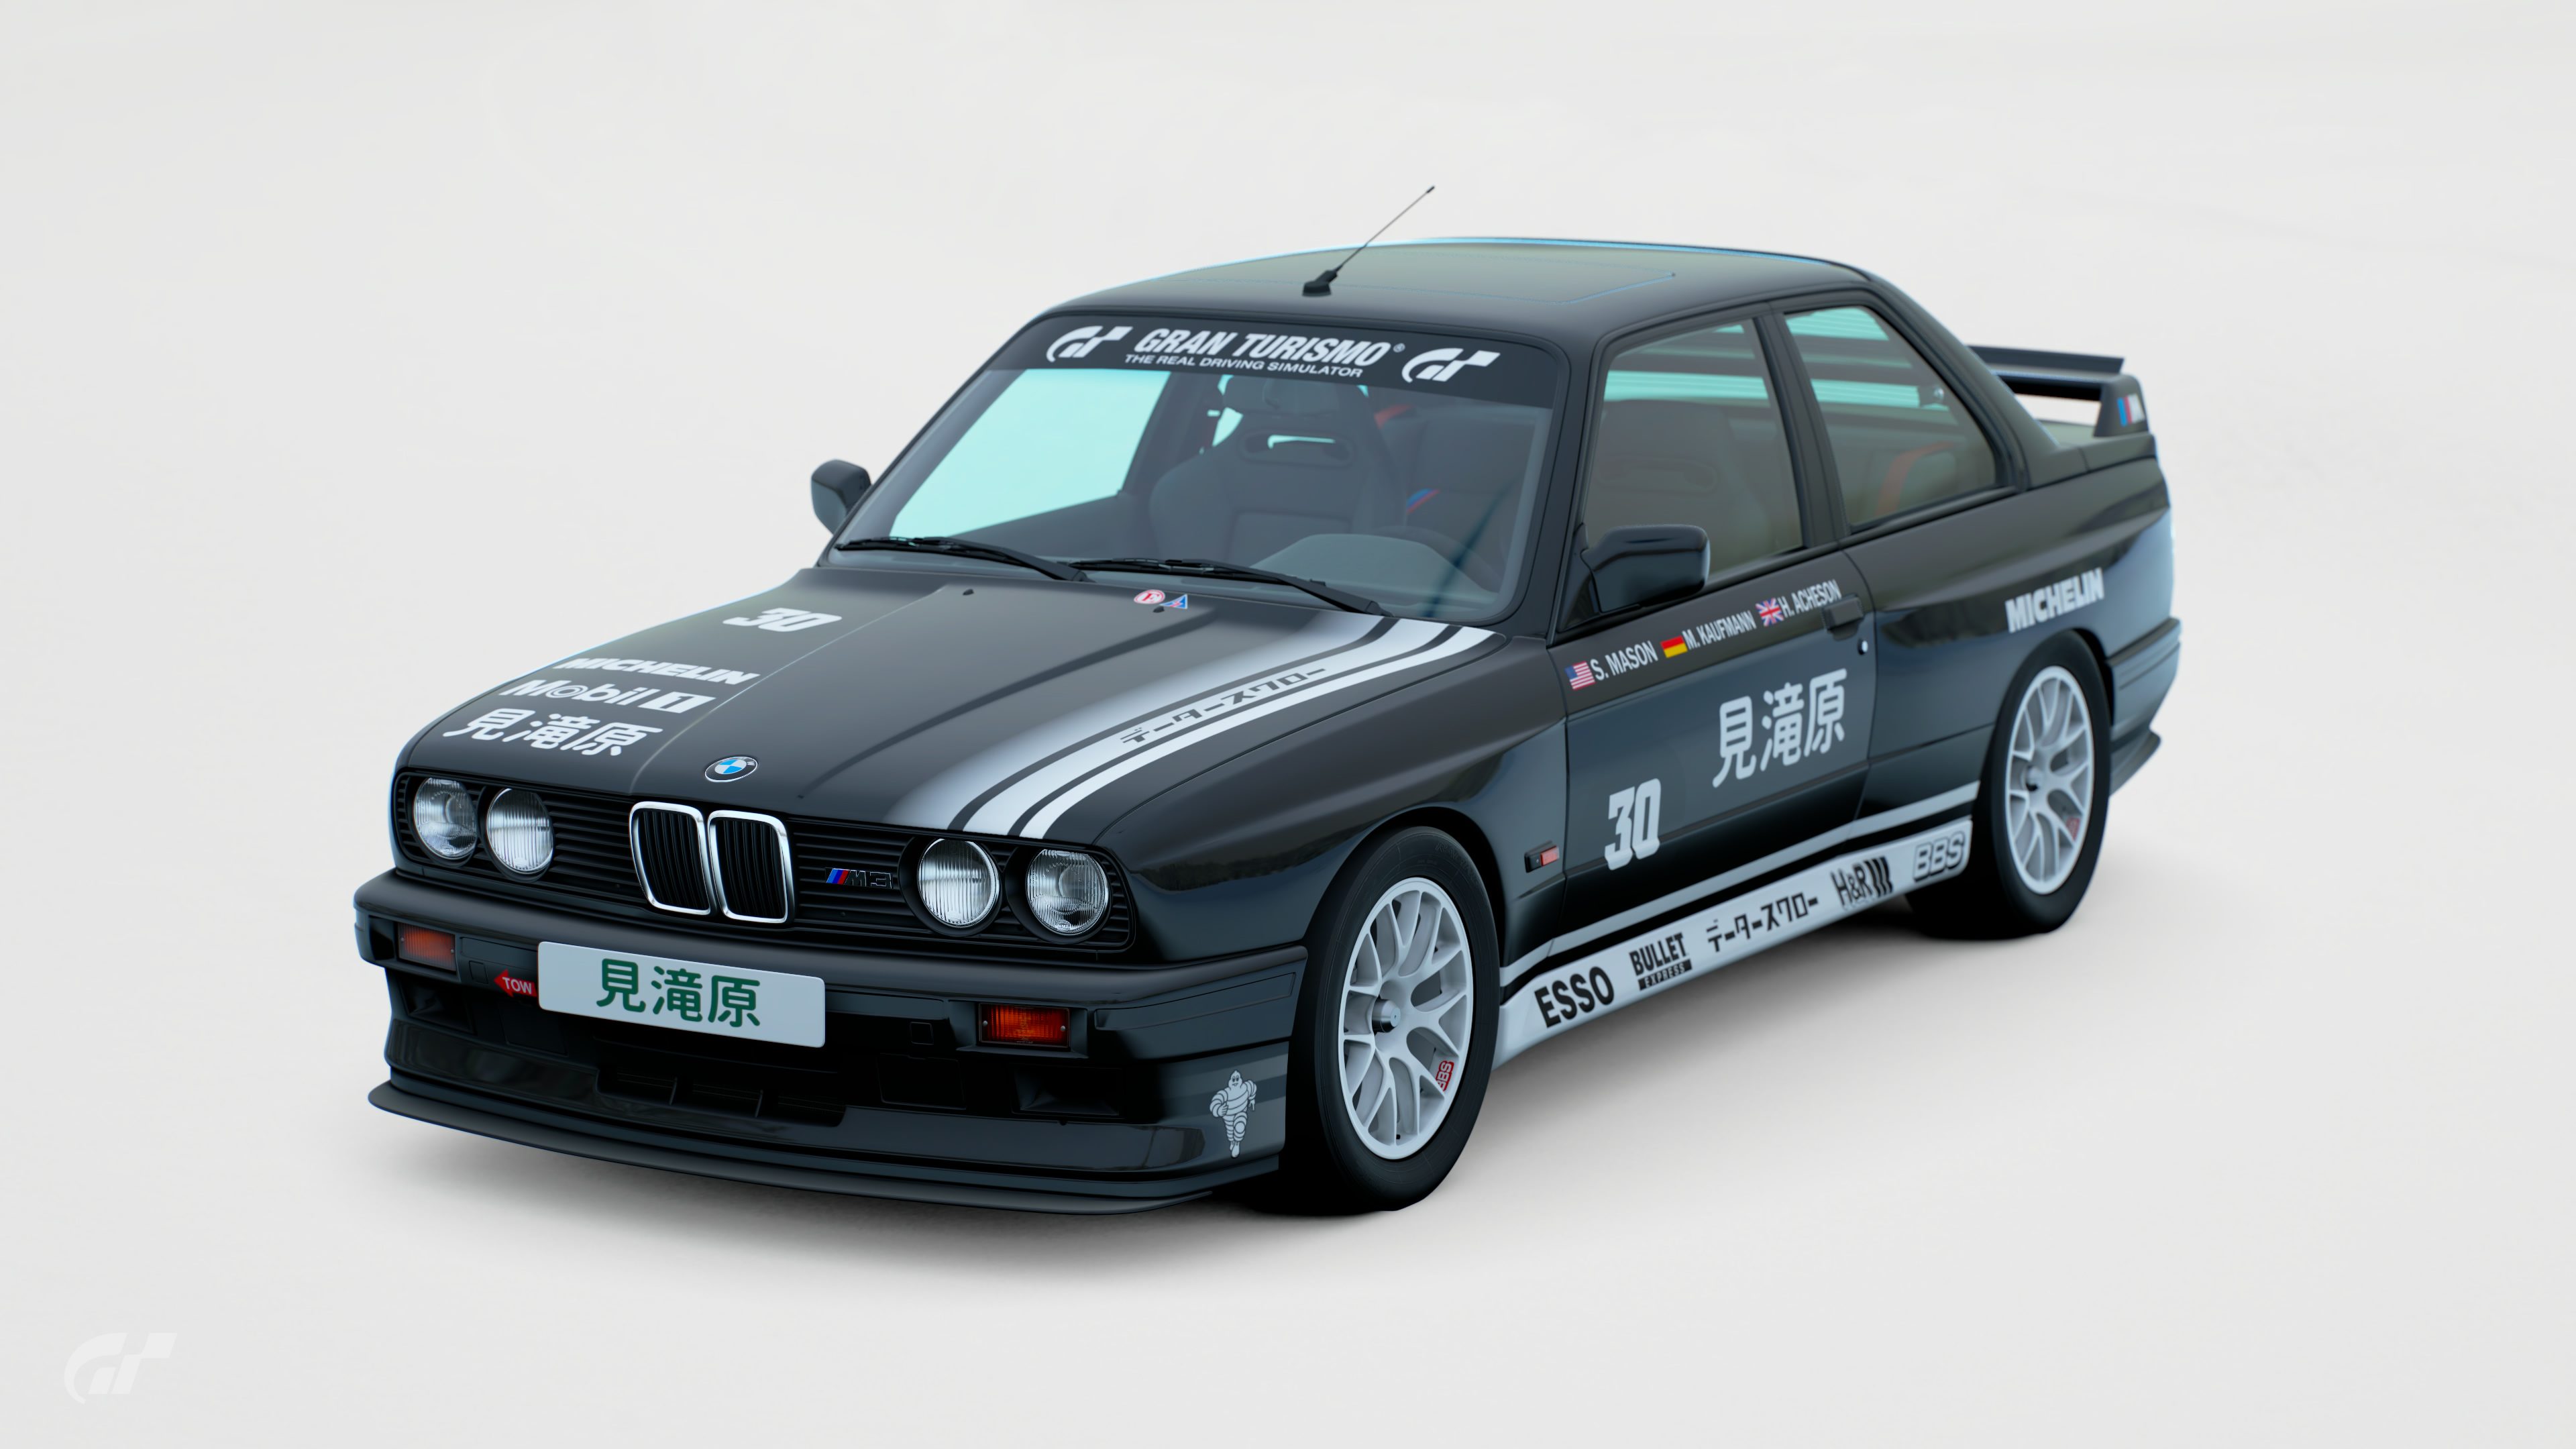 BMW M3 E30 1989 Fictional Gr.A Livery (Front 1/4) | GTPlanet